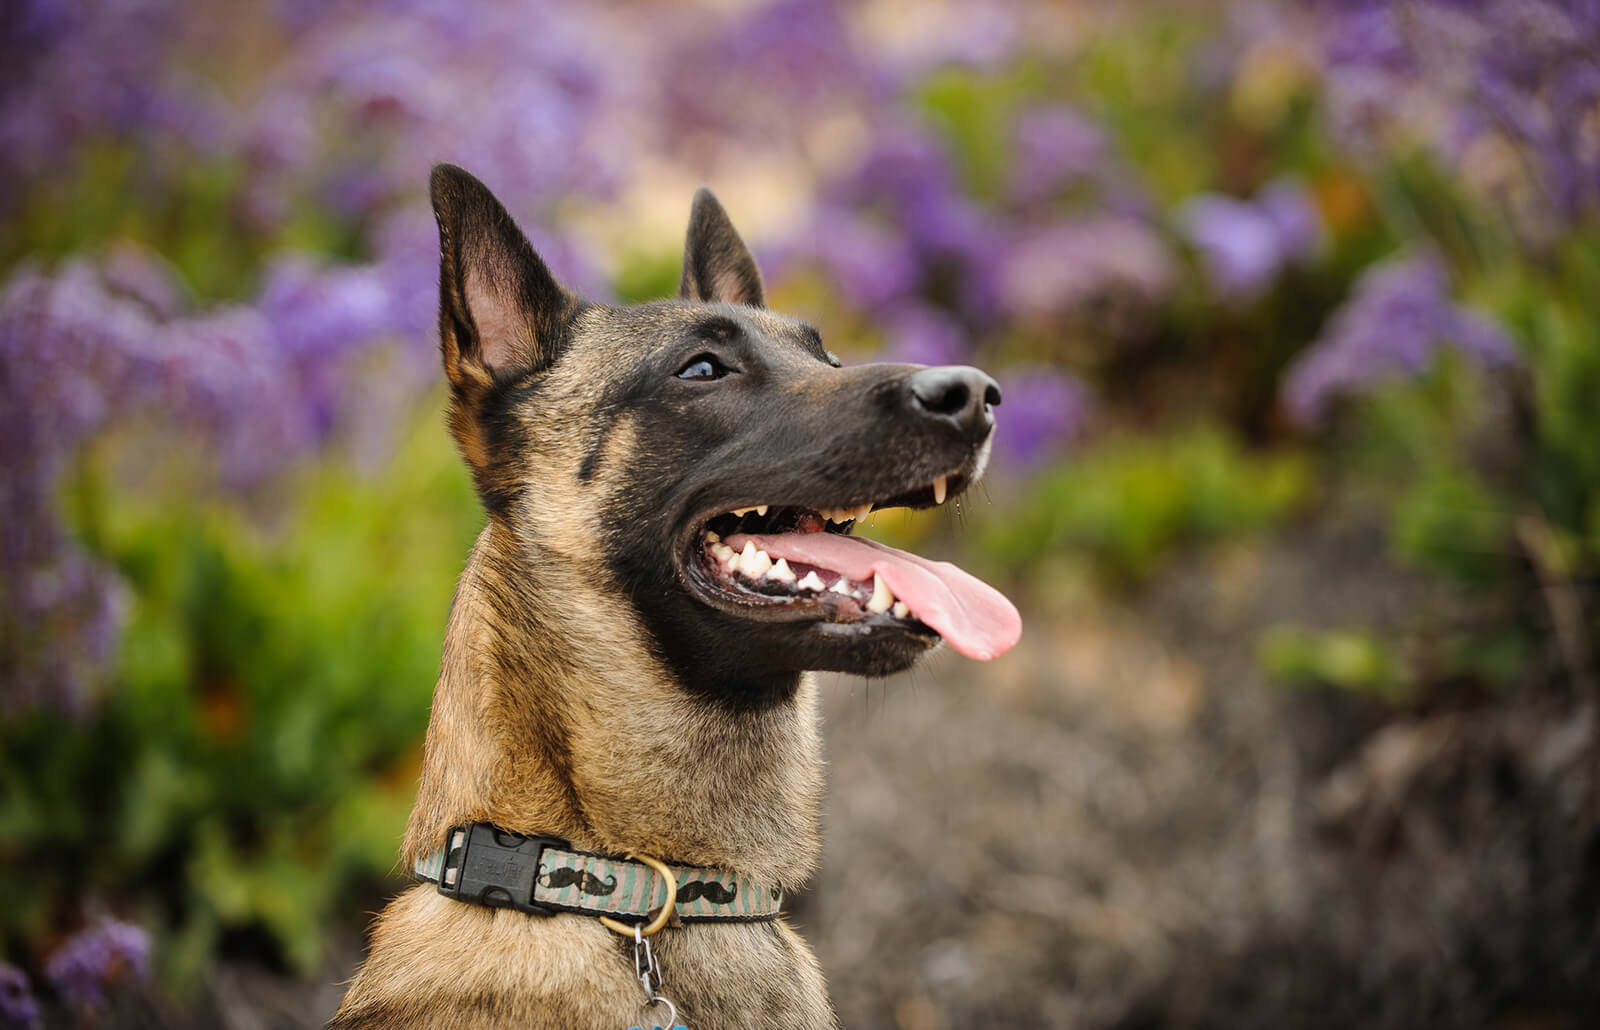 Can You Pass This Geography Quiz Where Every Question Comes With a 🐶 Dog-Related Clue? Belgian Shepherd Malinois